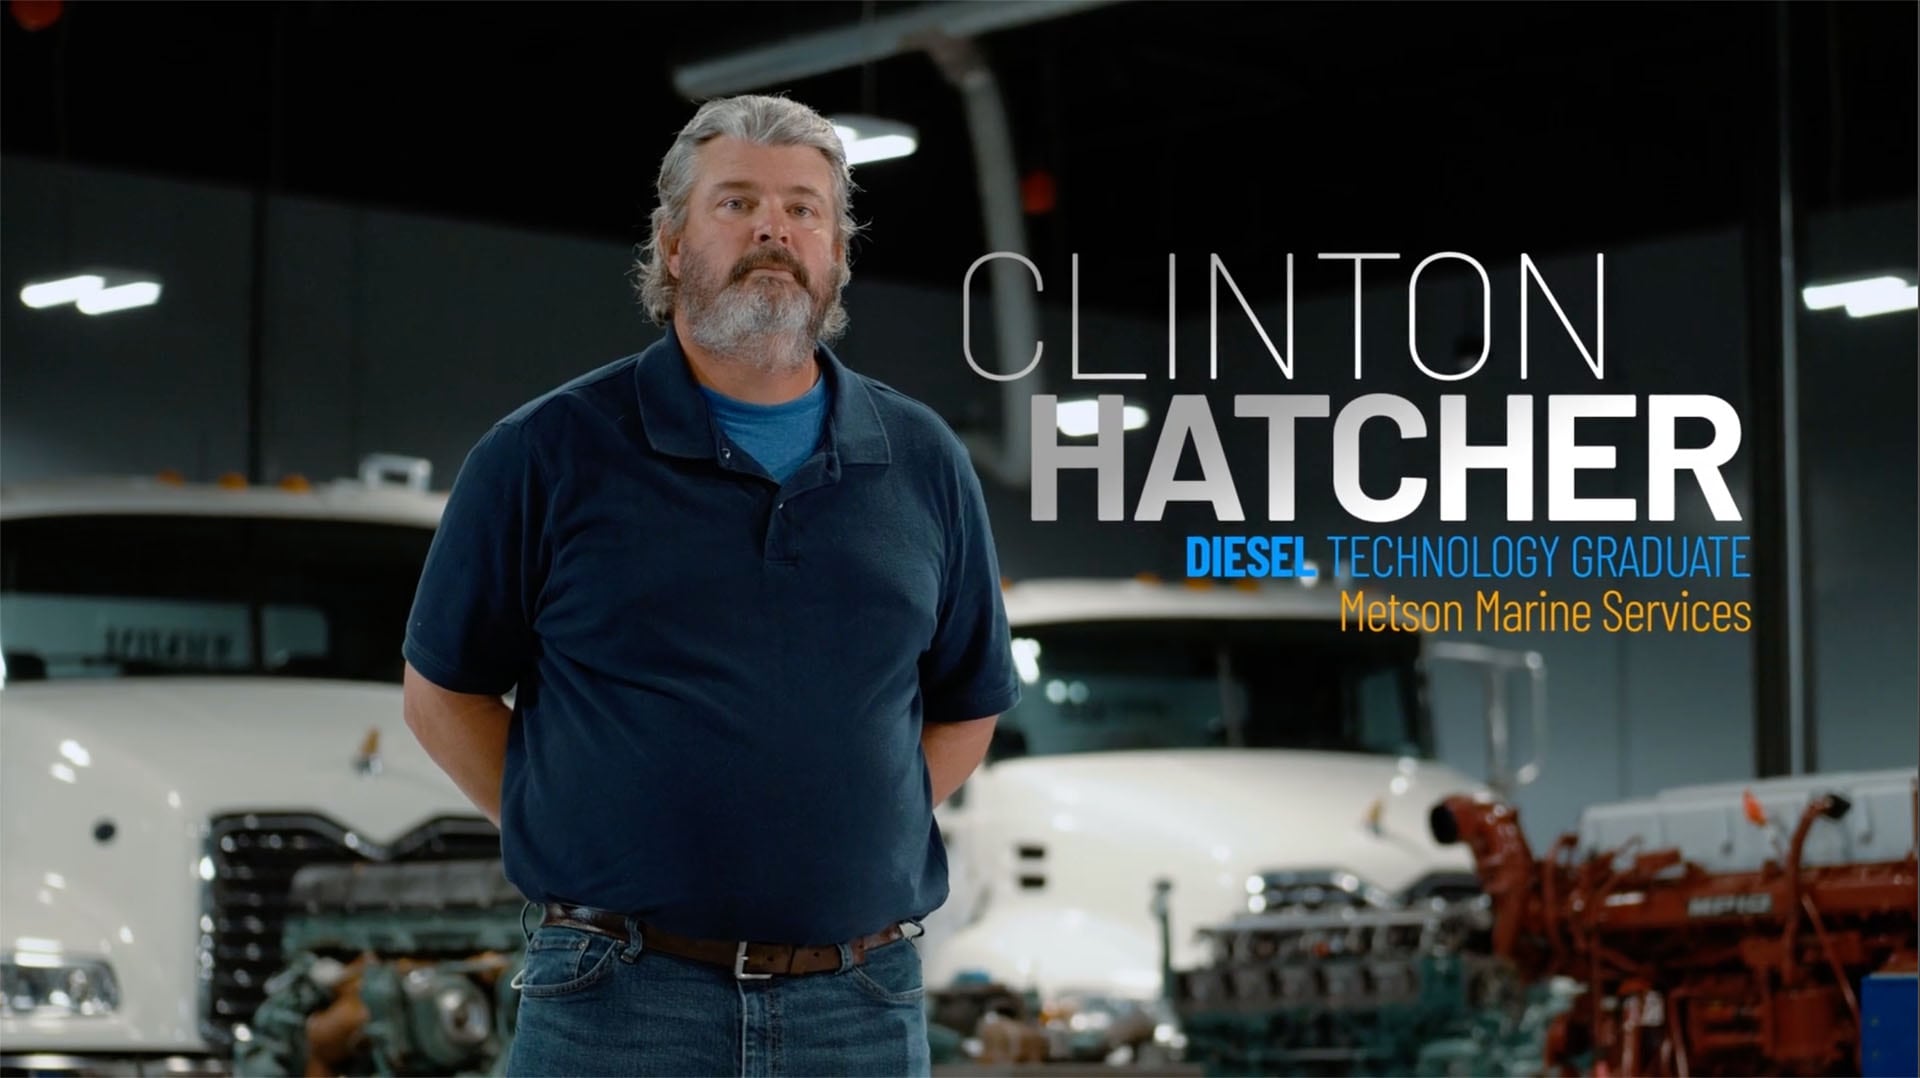 J-Tech Day in the Life series - Clinton Hatcher